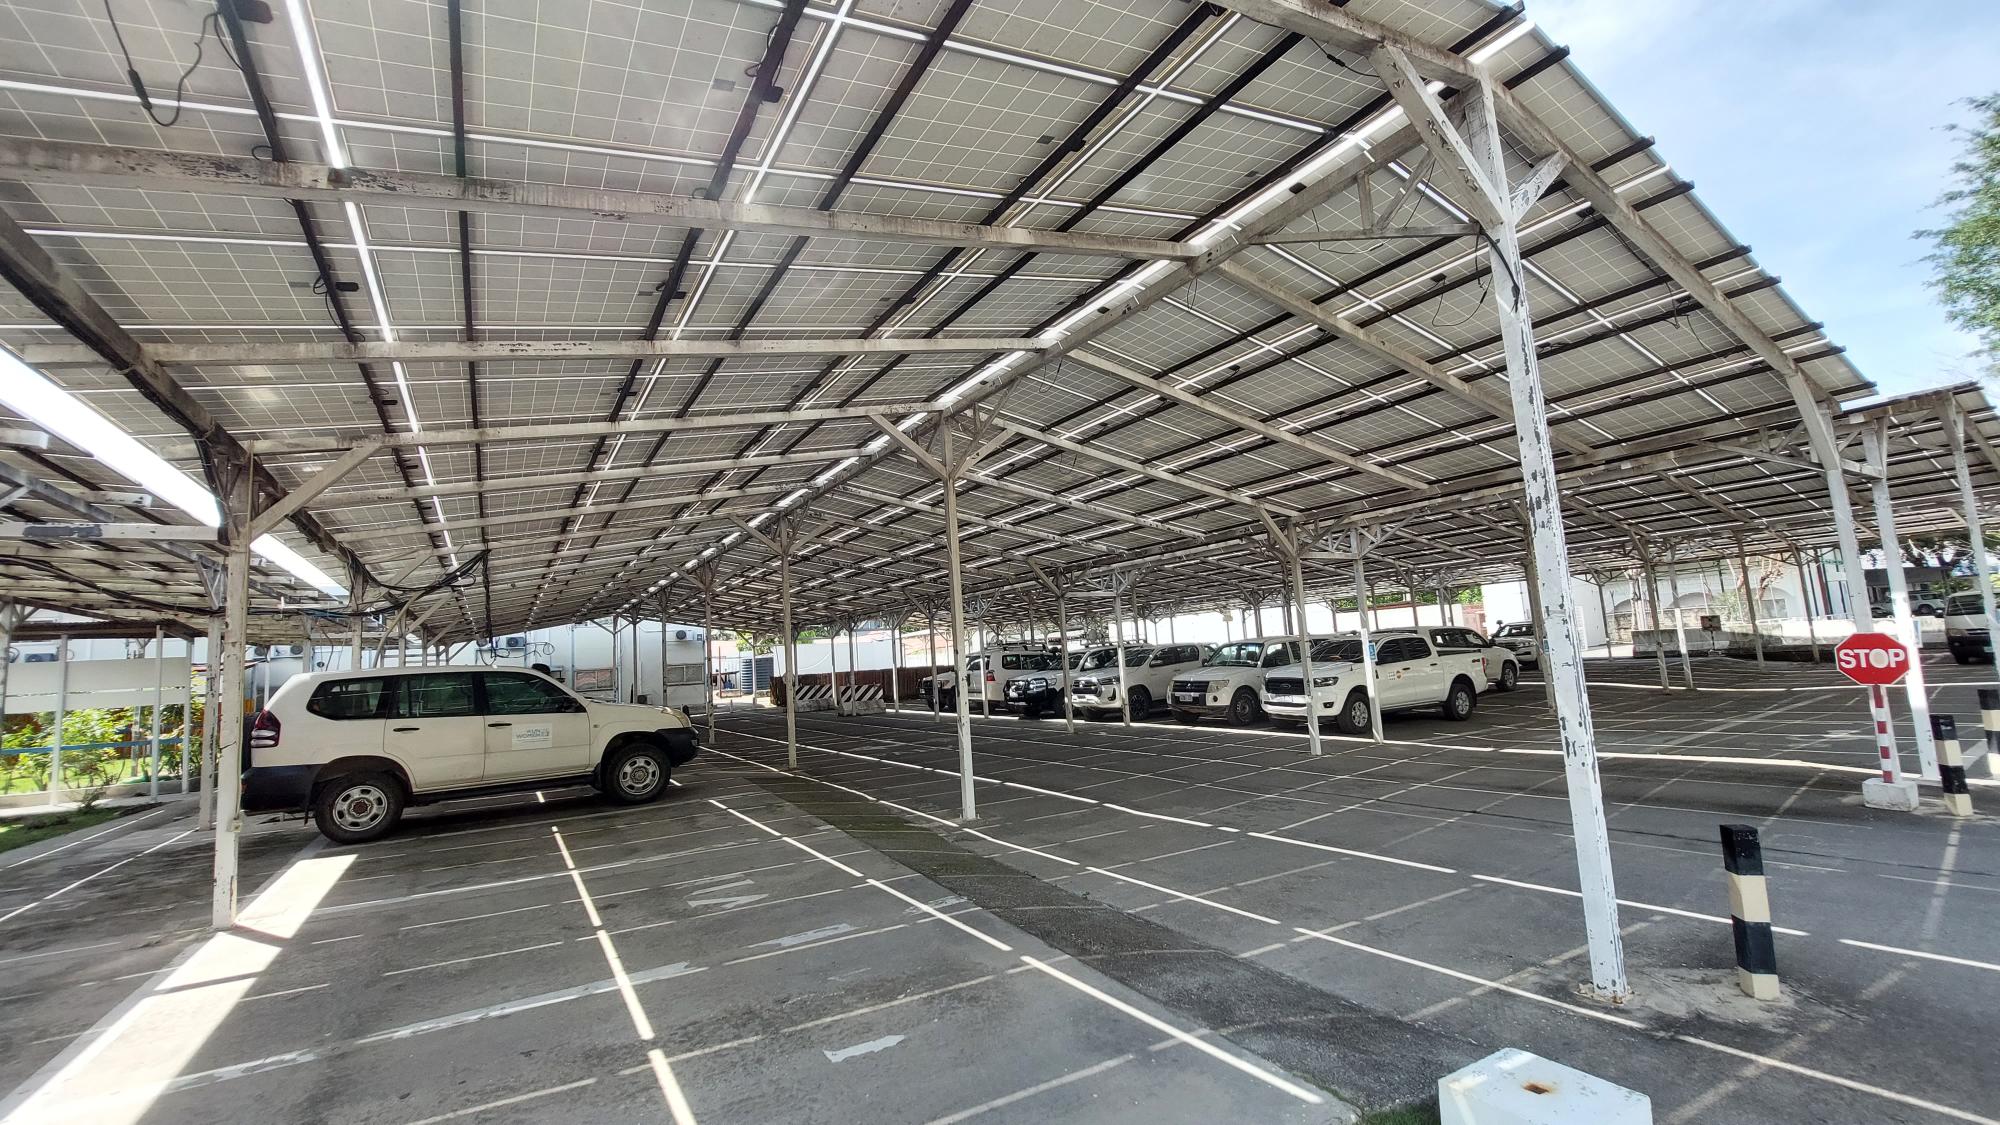 Car parked underneath solar panel structure 